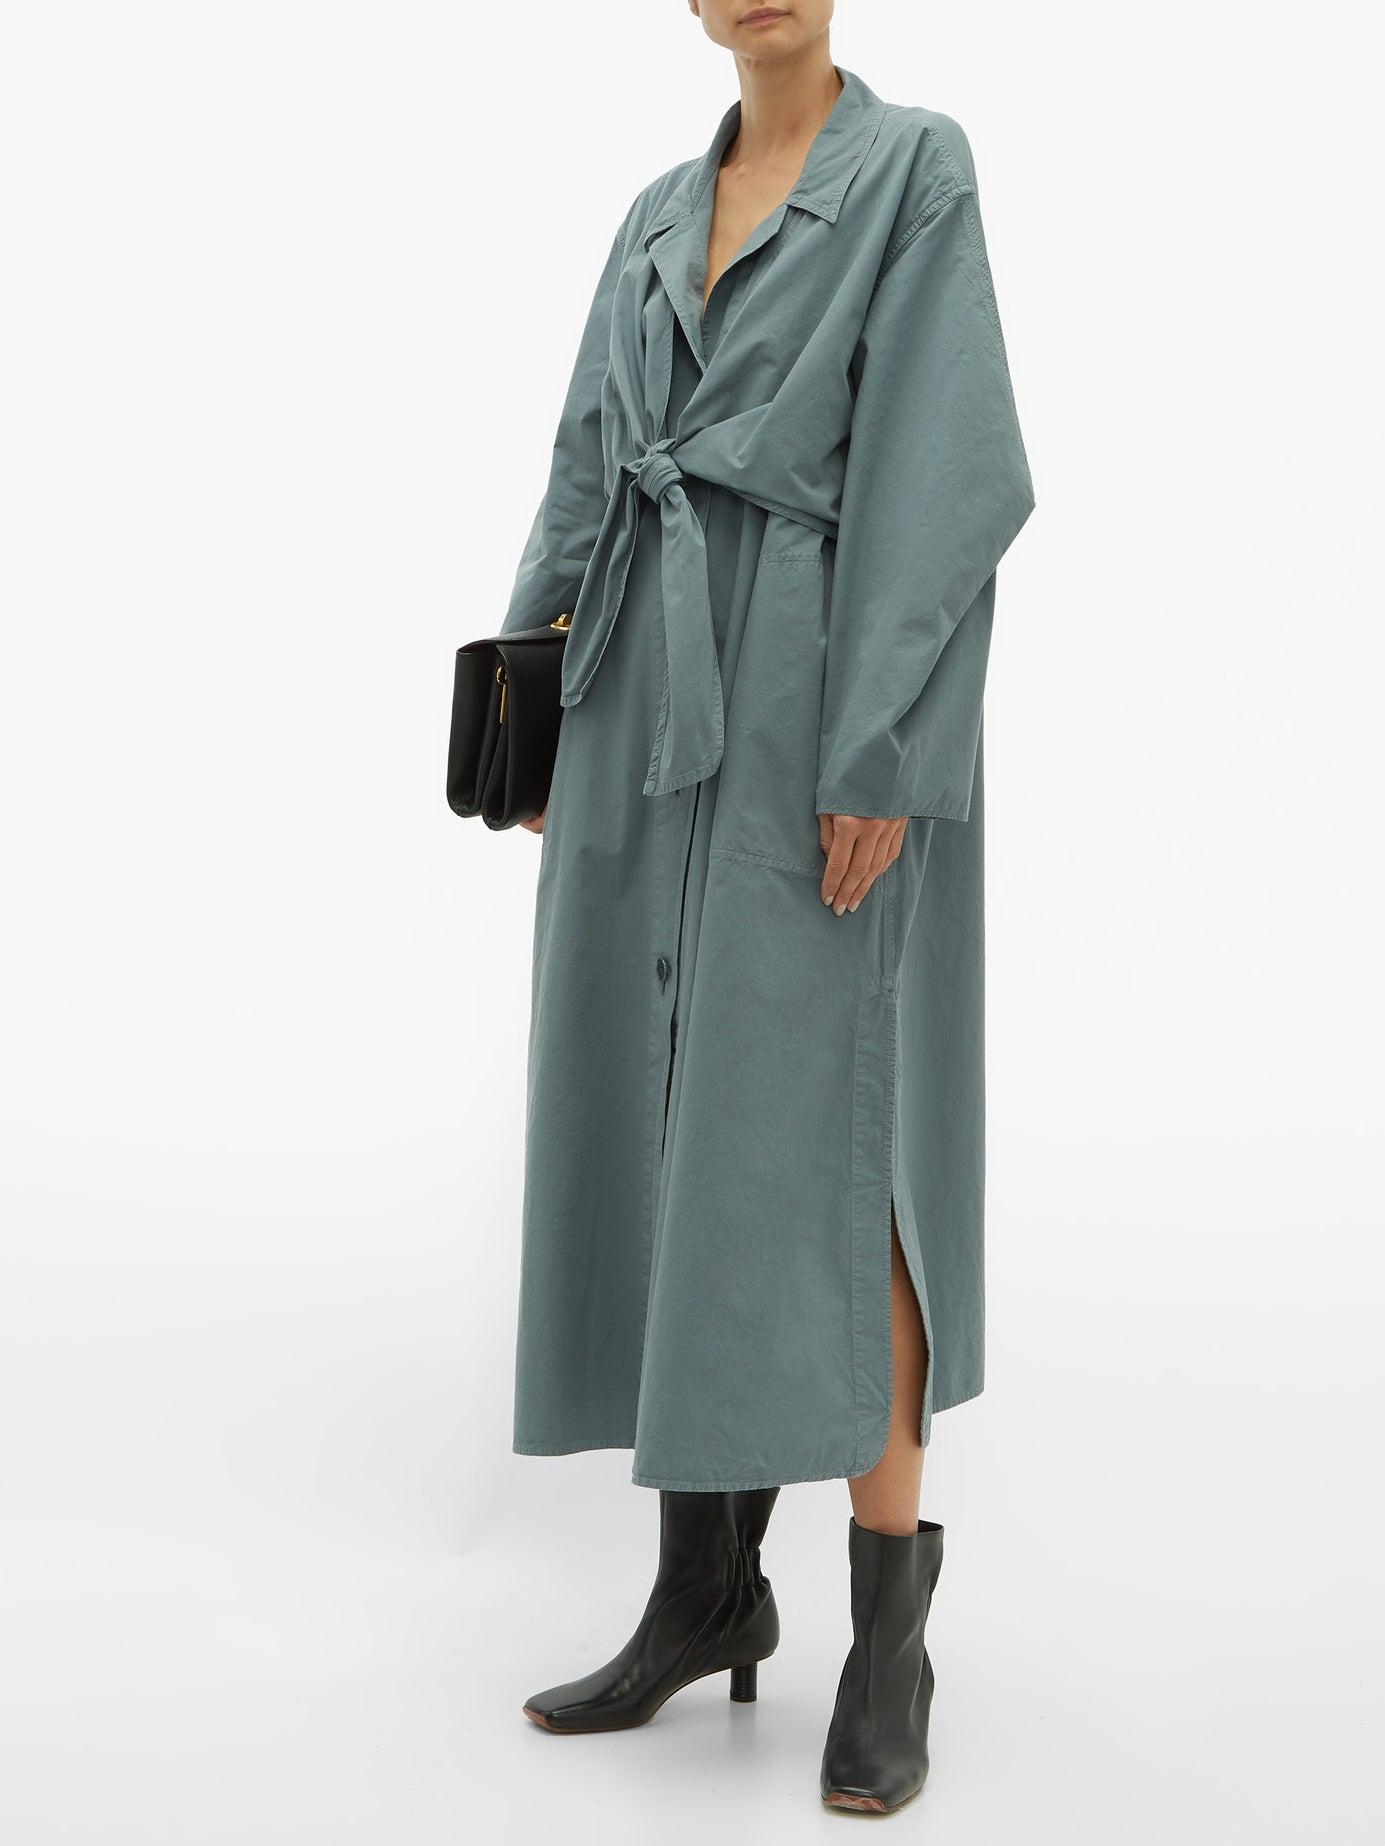 Lemaire Knotted Cotton Ventile Coat in Blue - Lyst